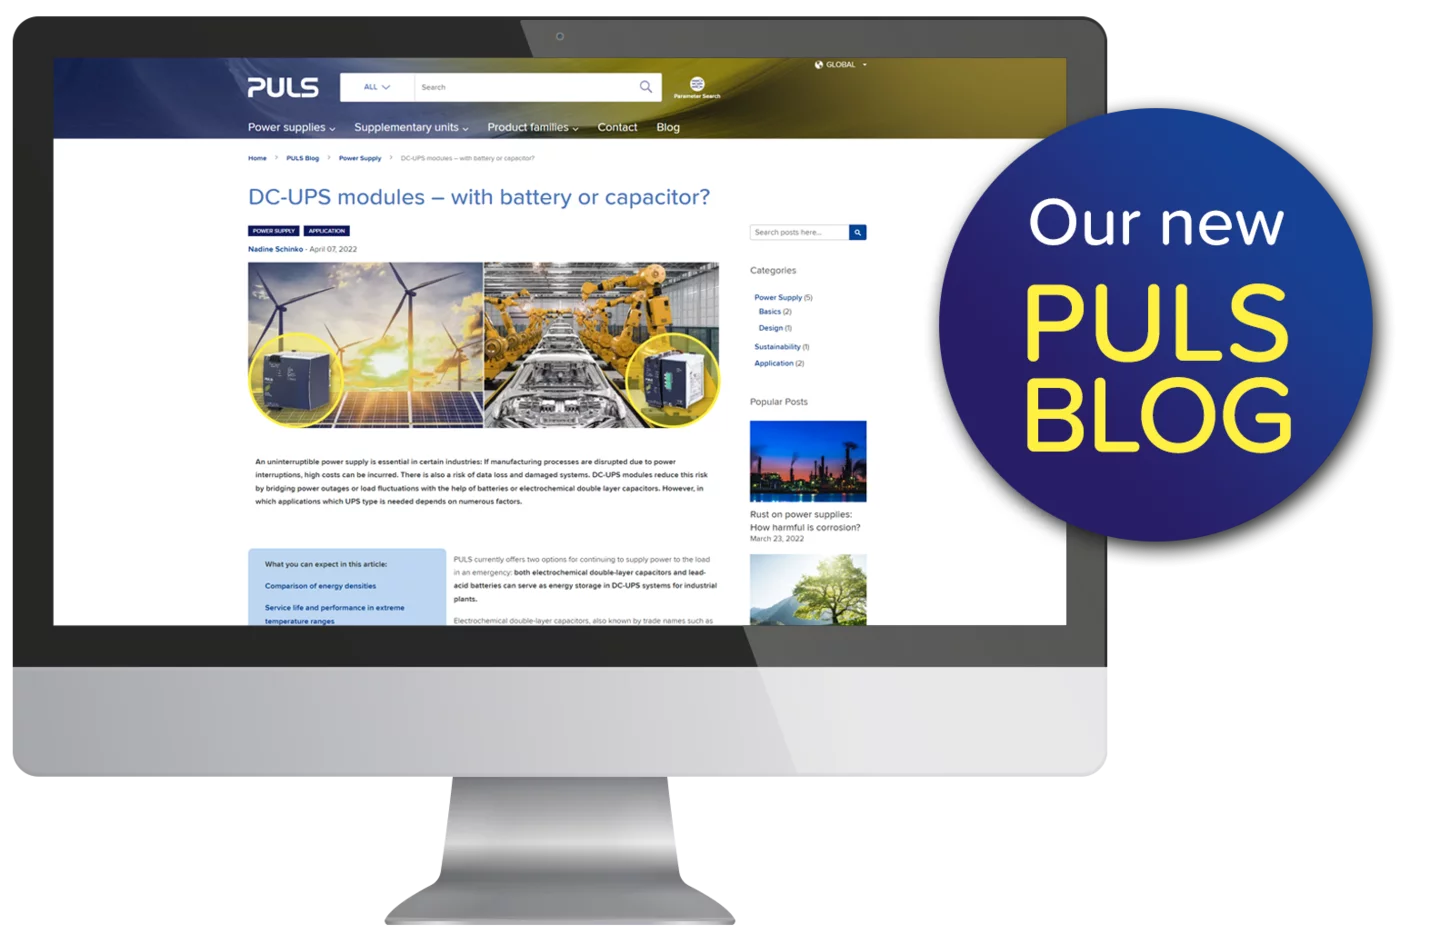 The new PULS Blog.